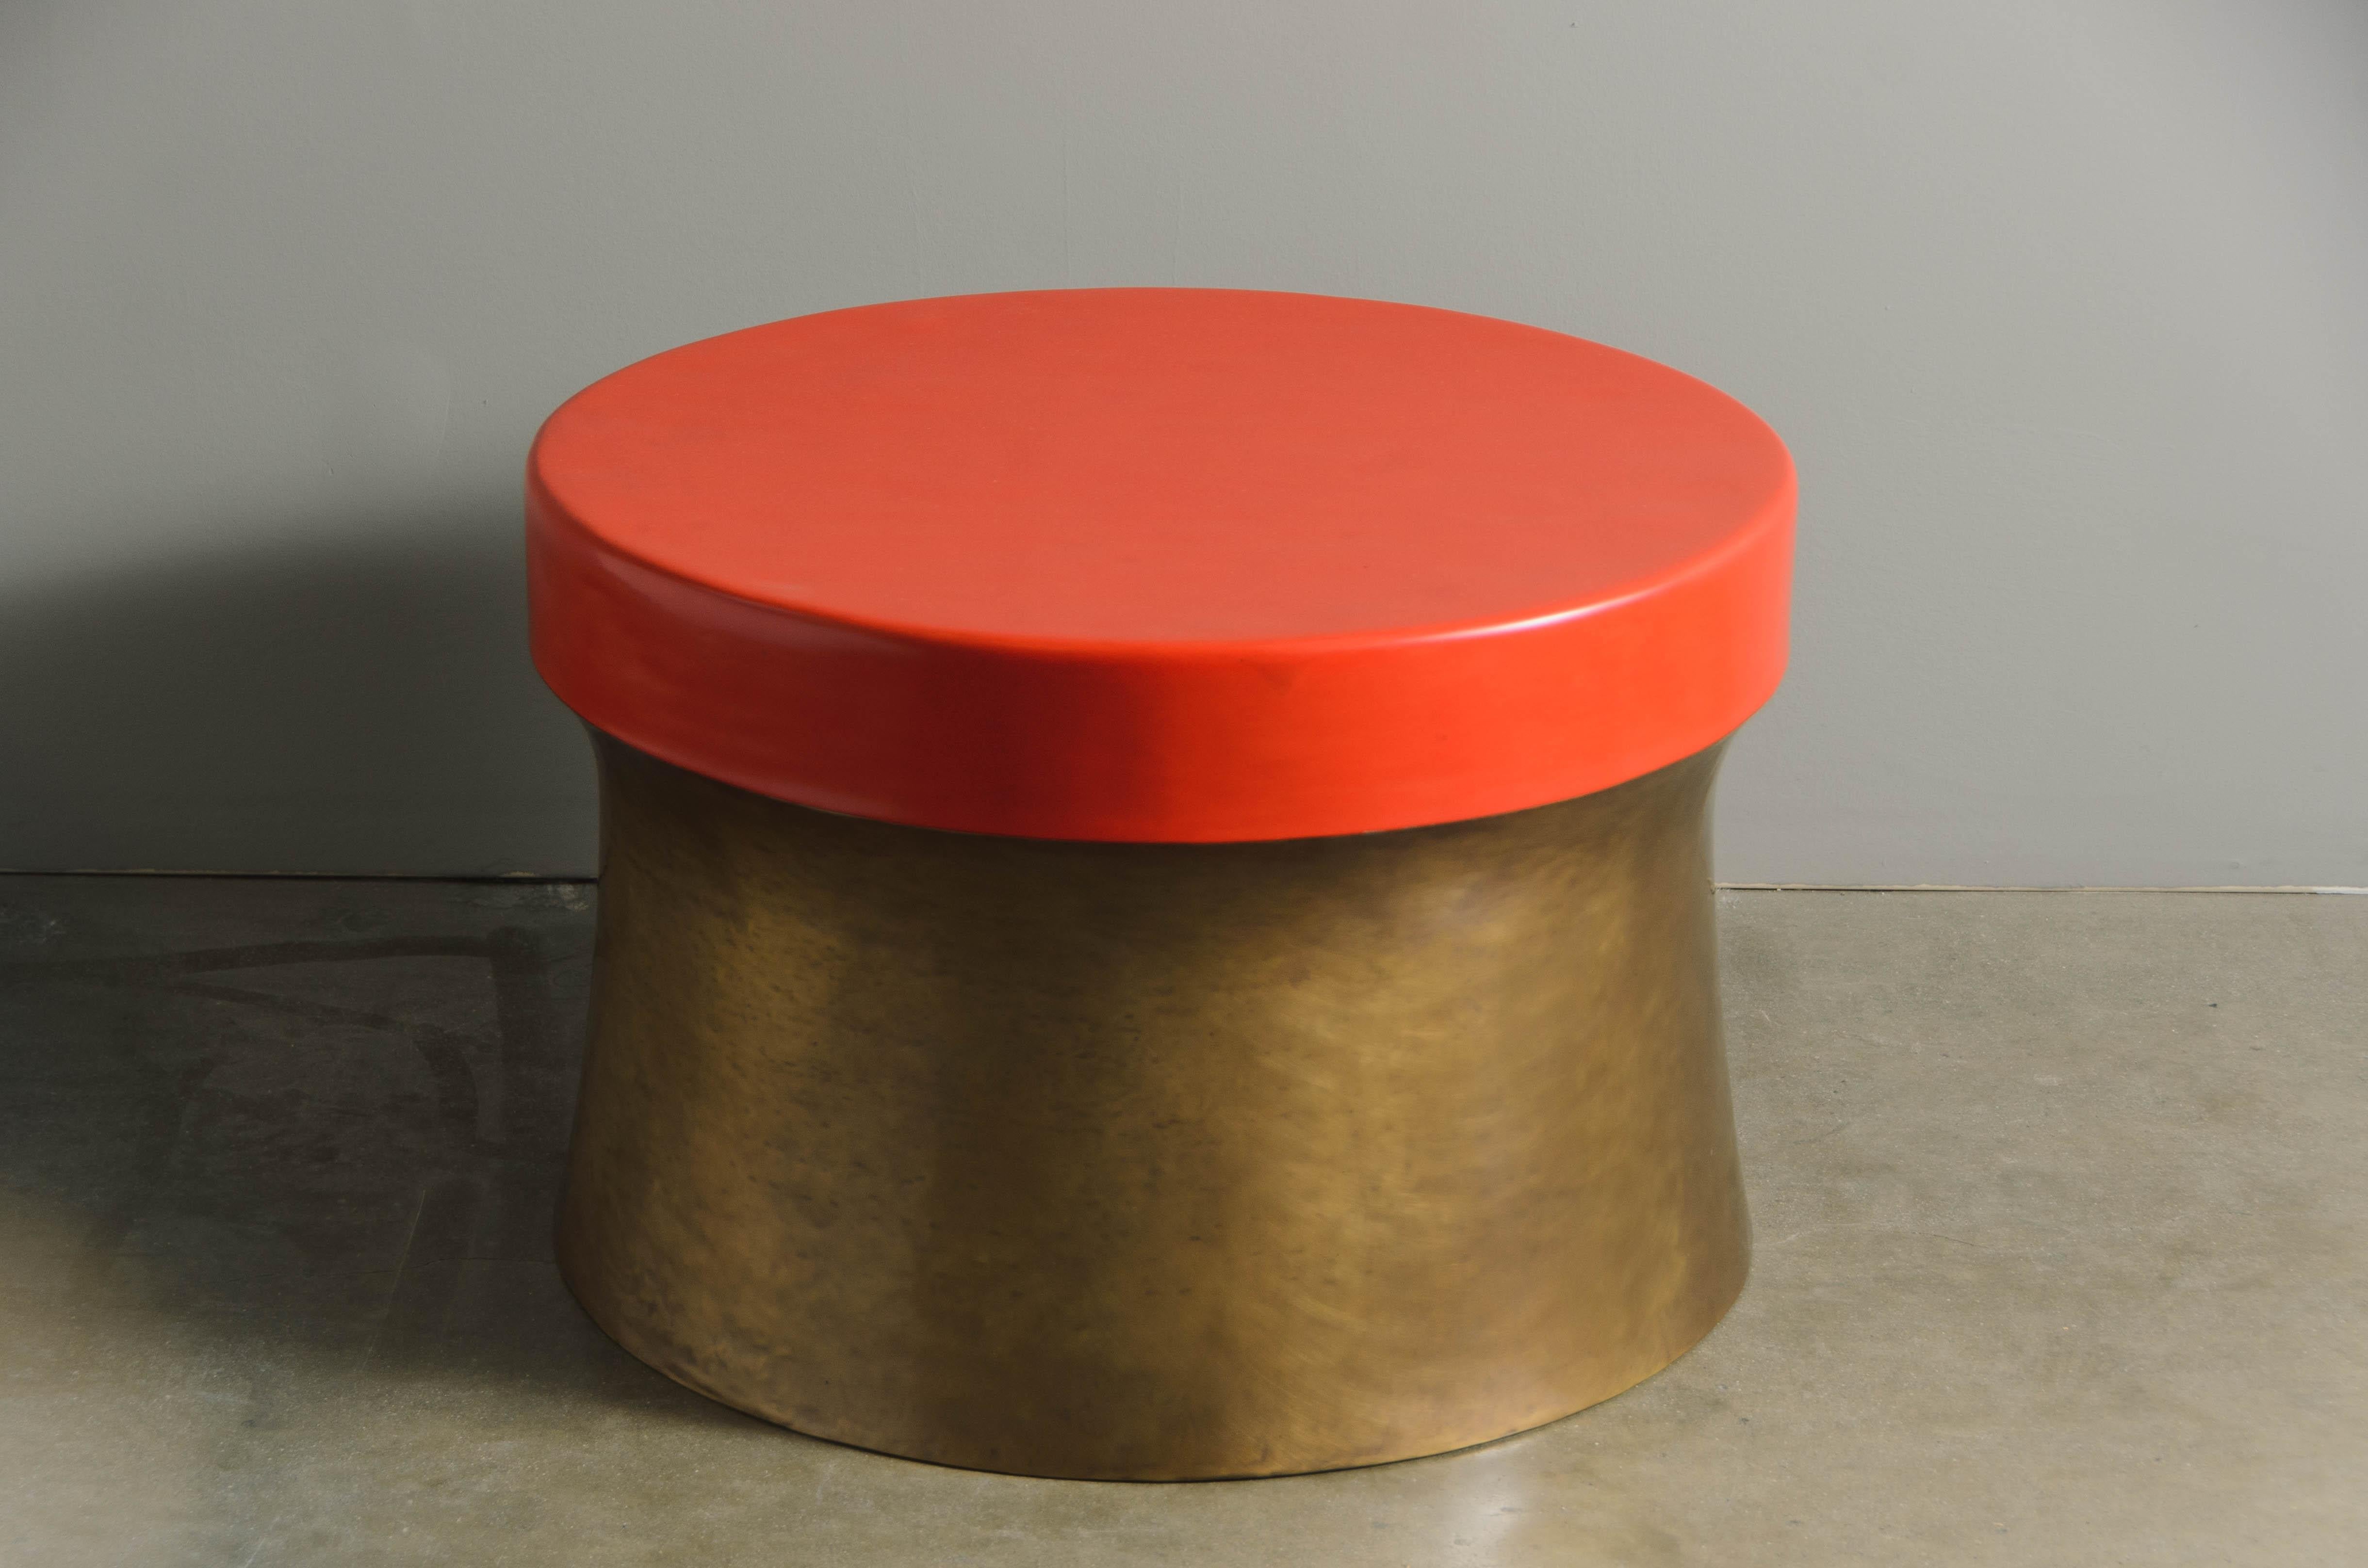 Dong Shan Table w/ Brass
Red Lacquer Top
Hand Repoussé Brass
Contemporary 
Limited Edition

Repoussé is the traditional art of hand-hammering decorative relief onto sheet metal. This technique involves using a hammer and various shaping tools.